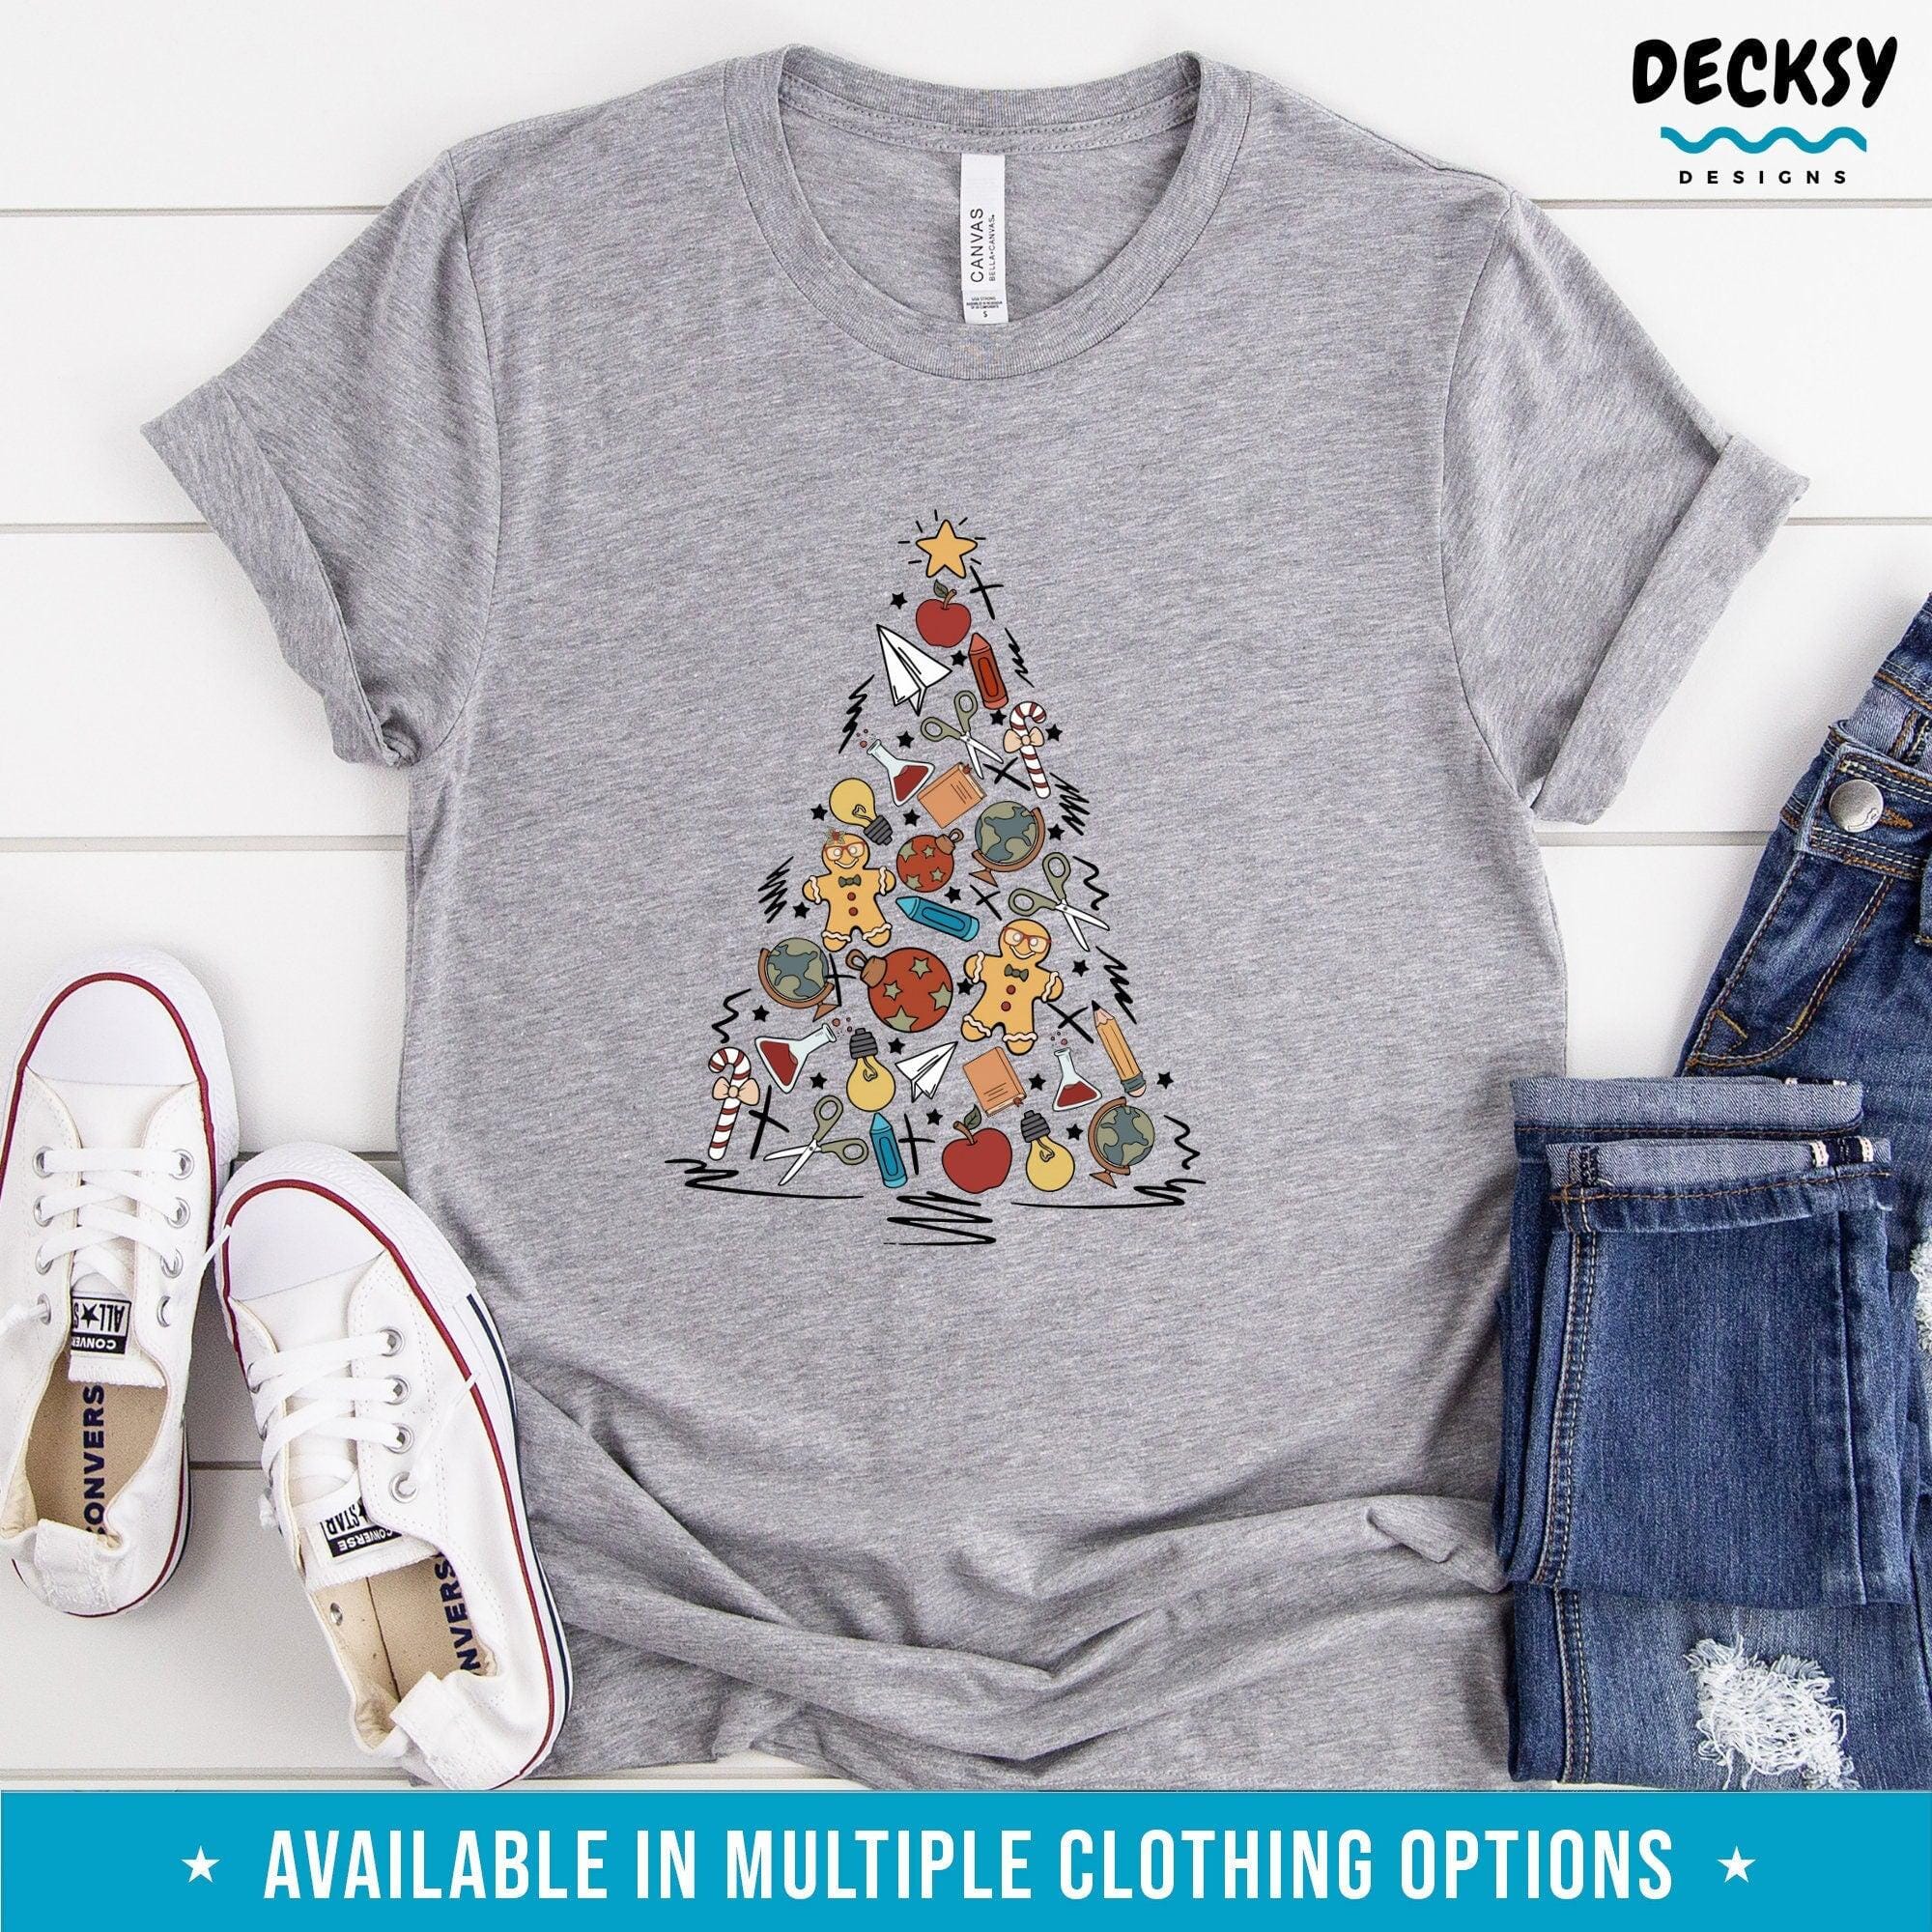 Teacher Christmas Tree Shirt, Gift for School Teacher-Clothing:Gender-Neutral Adult Clothing:Tops & Tees:T-shirts:Graphic Tees-DecksyDesigns